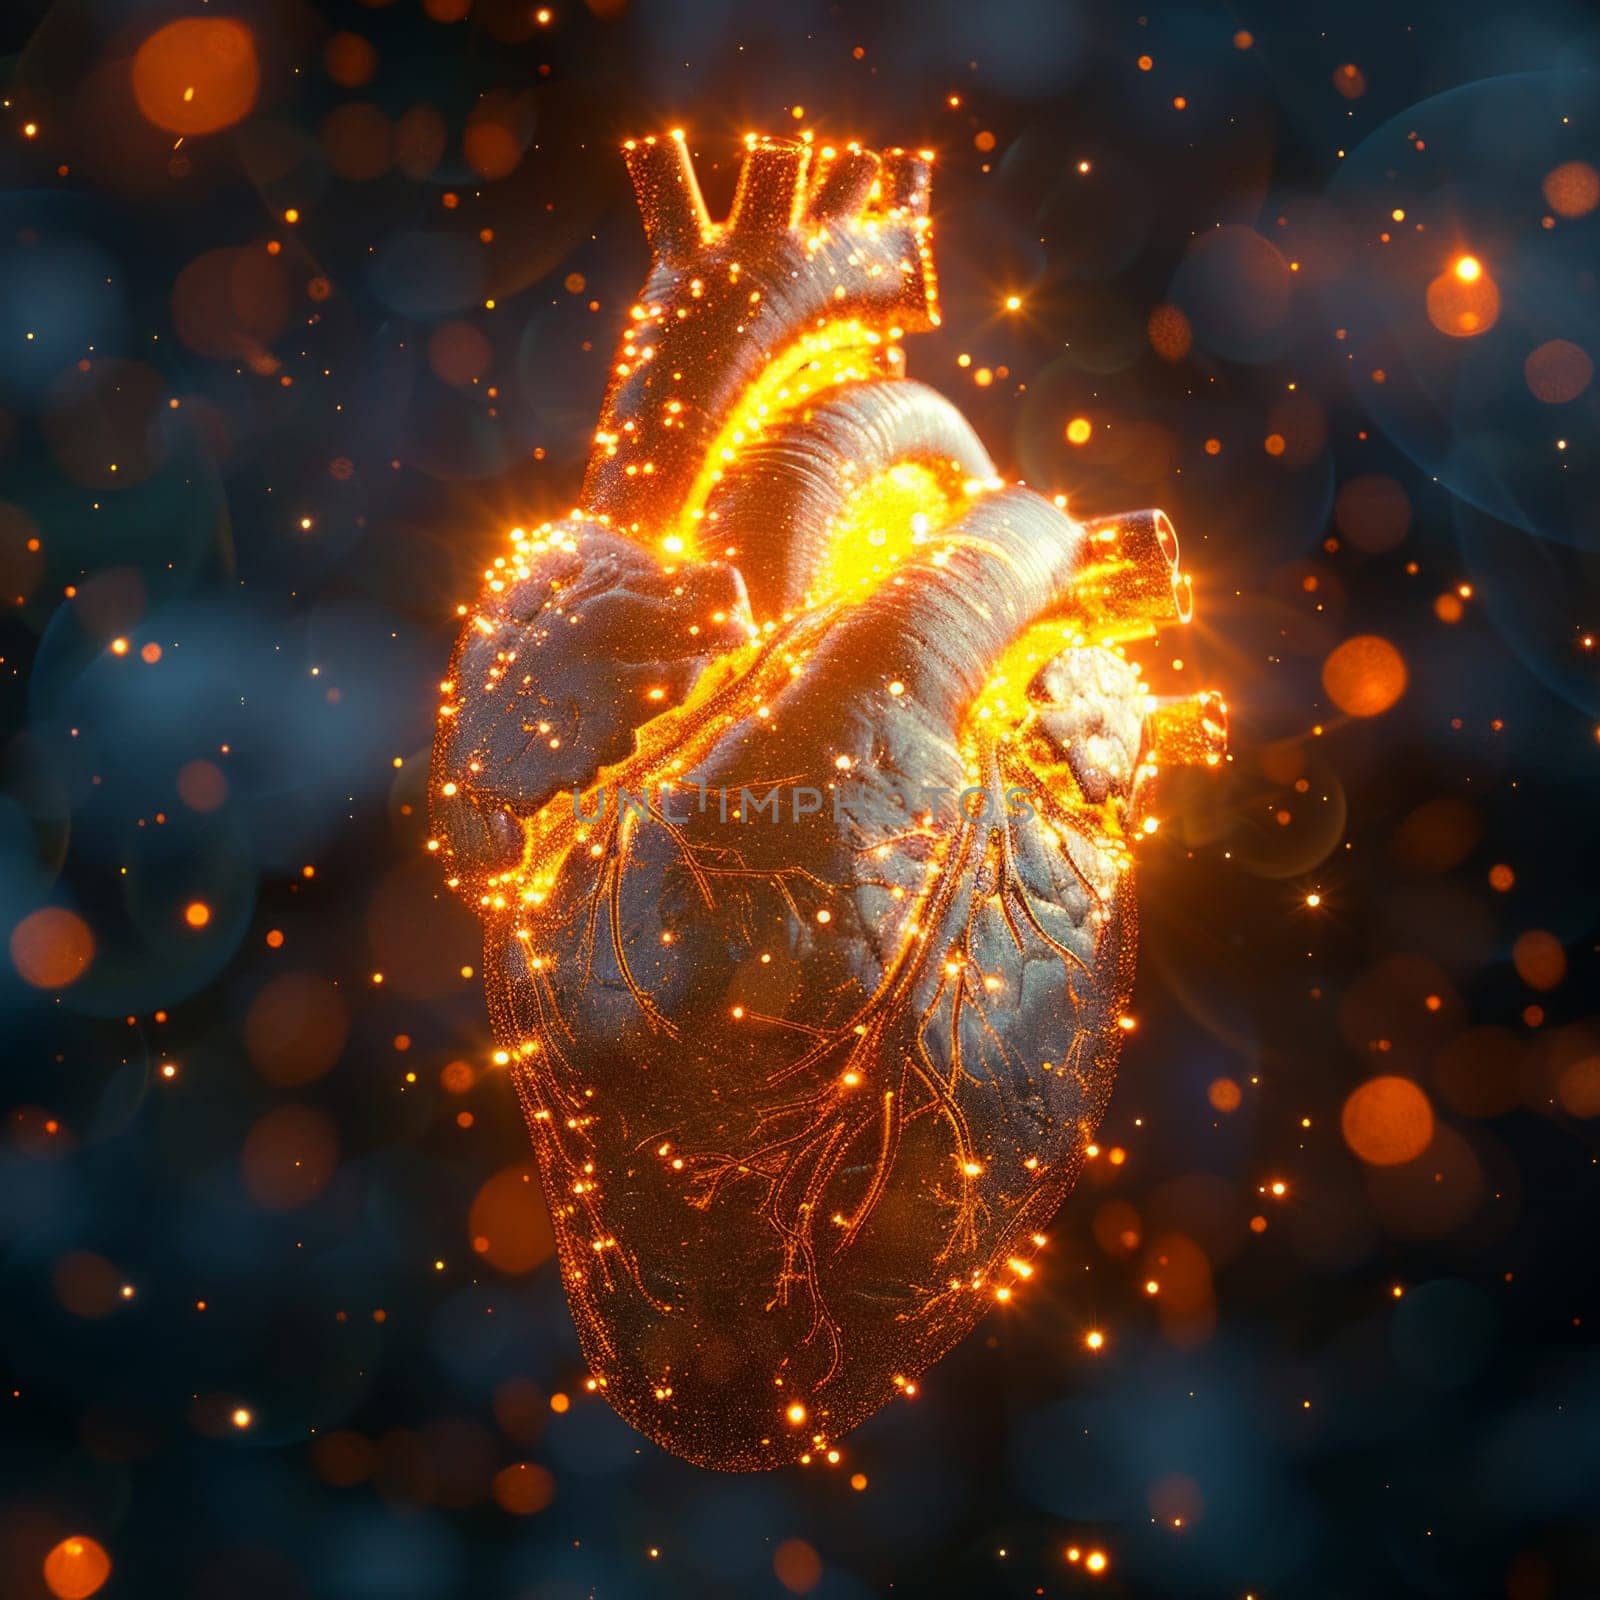 A mesmerizing computer-generated portrayal of a human heart, pulsating in radiant hues and intricate details by but_photo